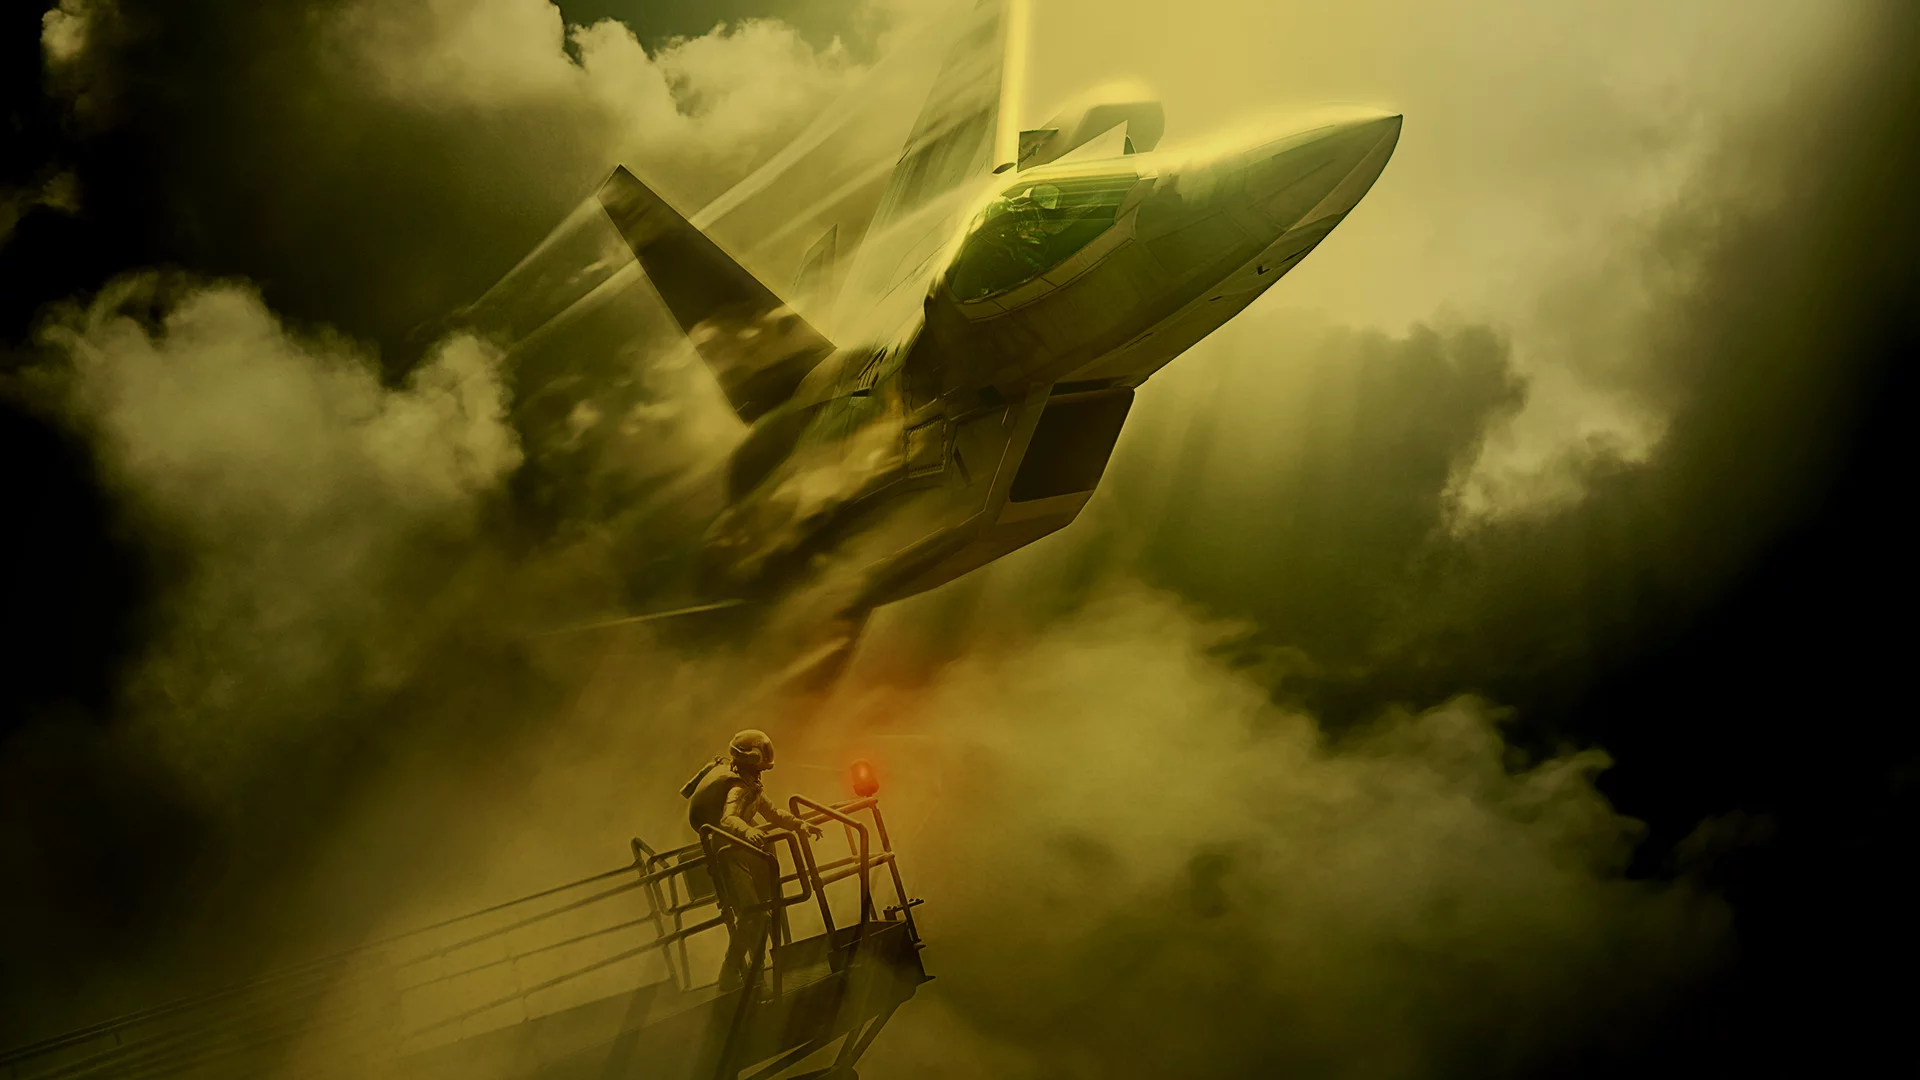 Check out 30 minutes of Ace Combat 7: Skies Unknown gameplay